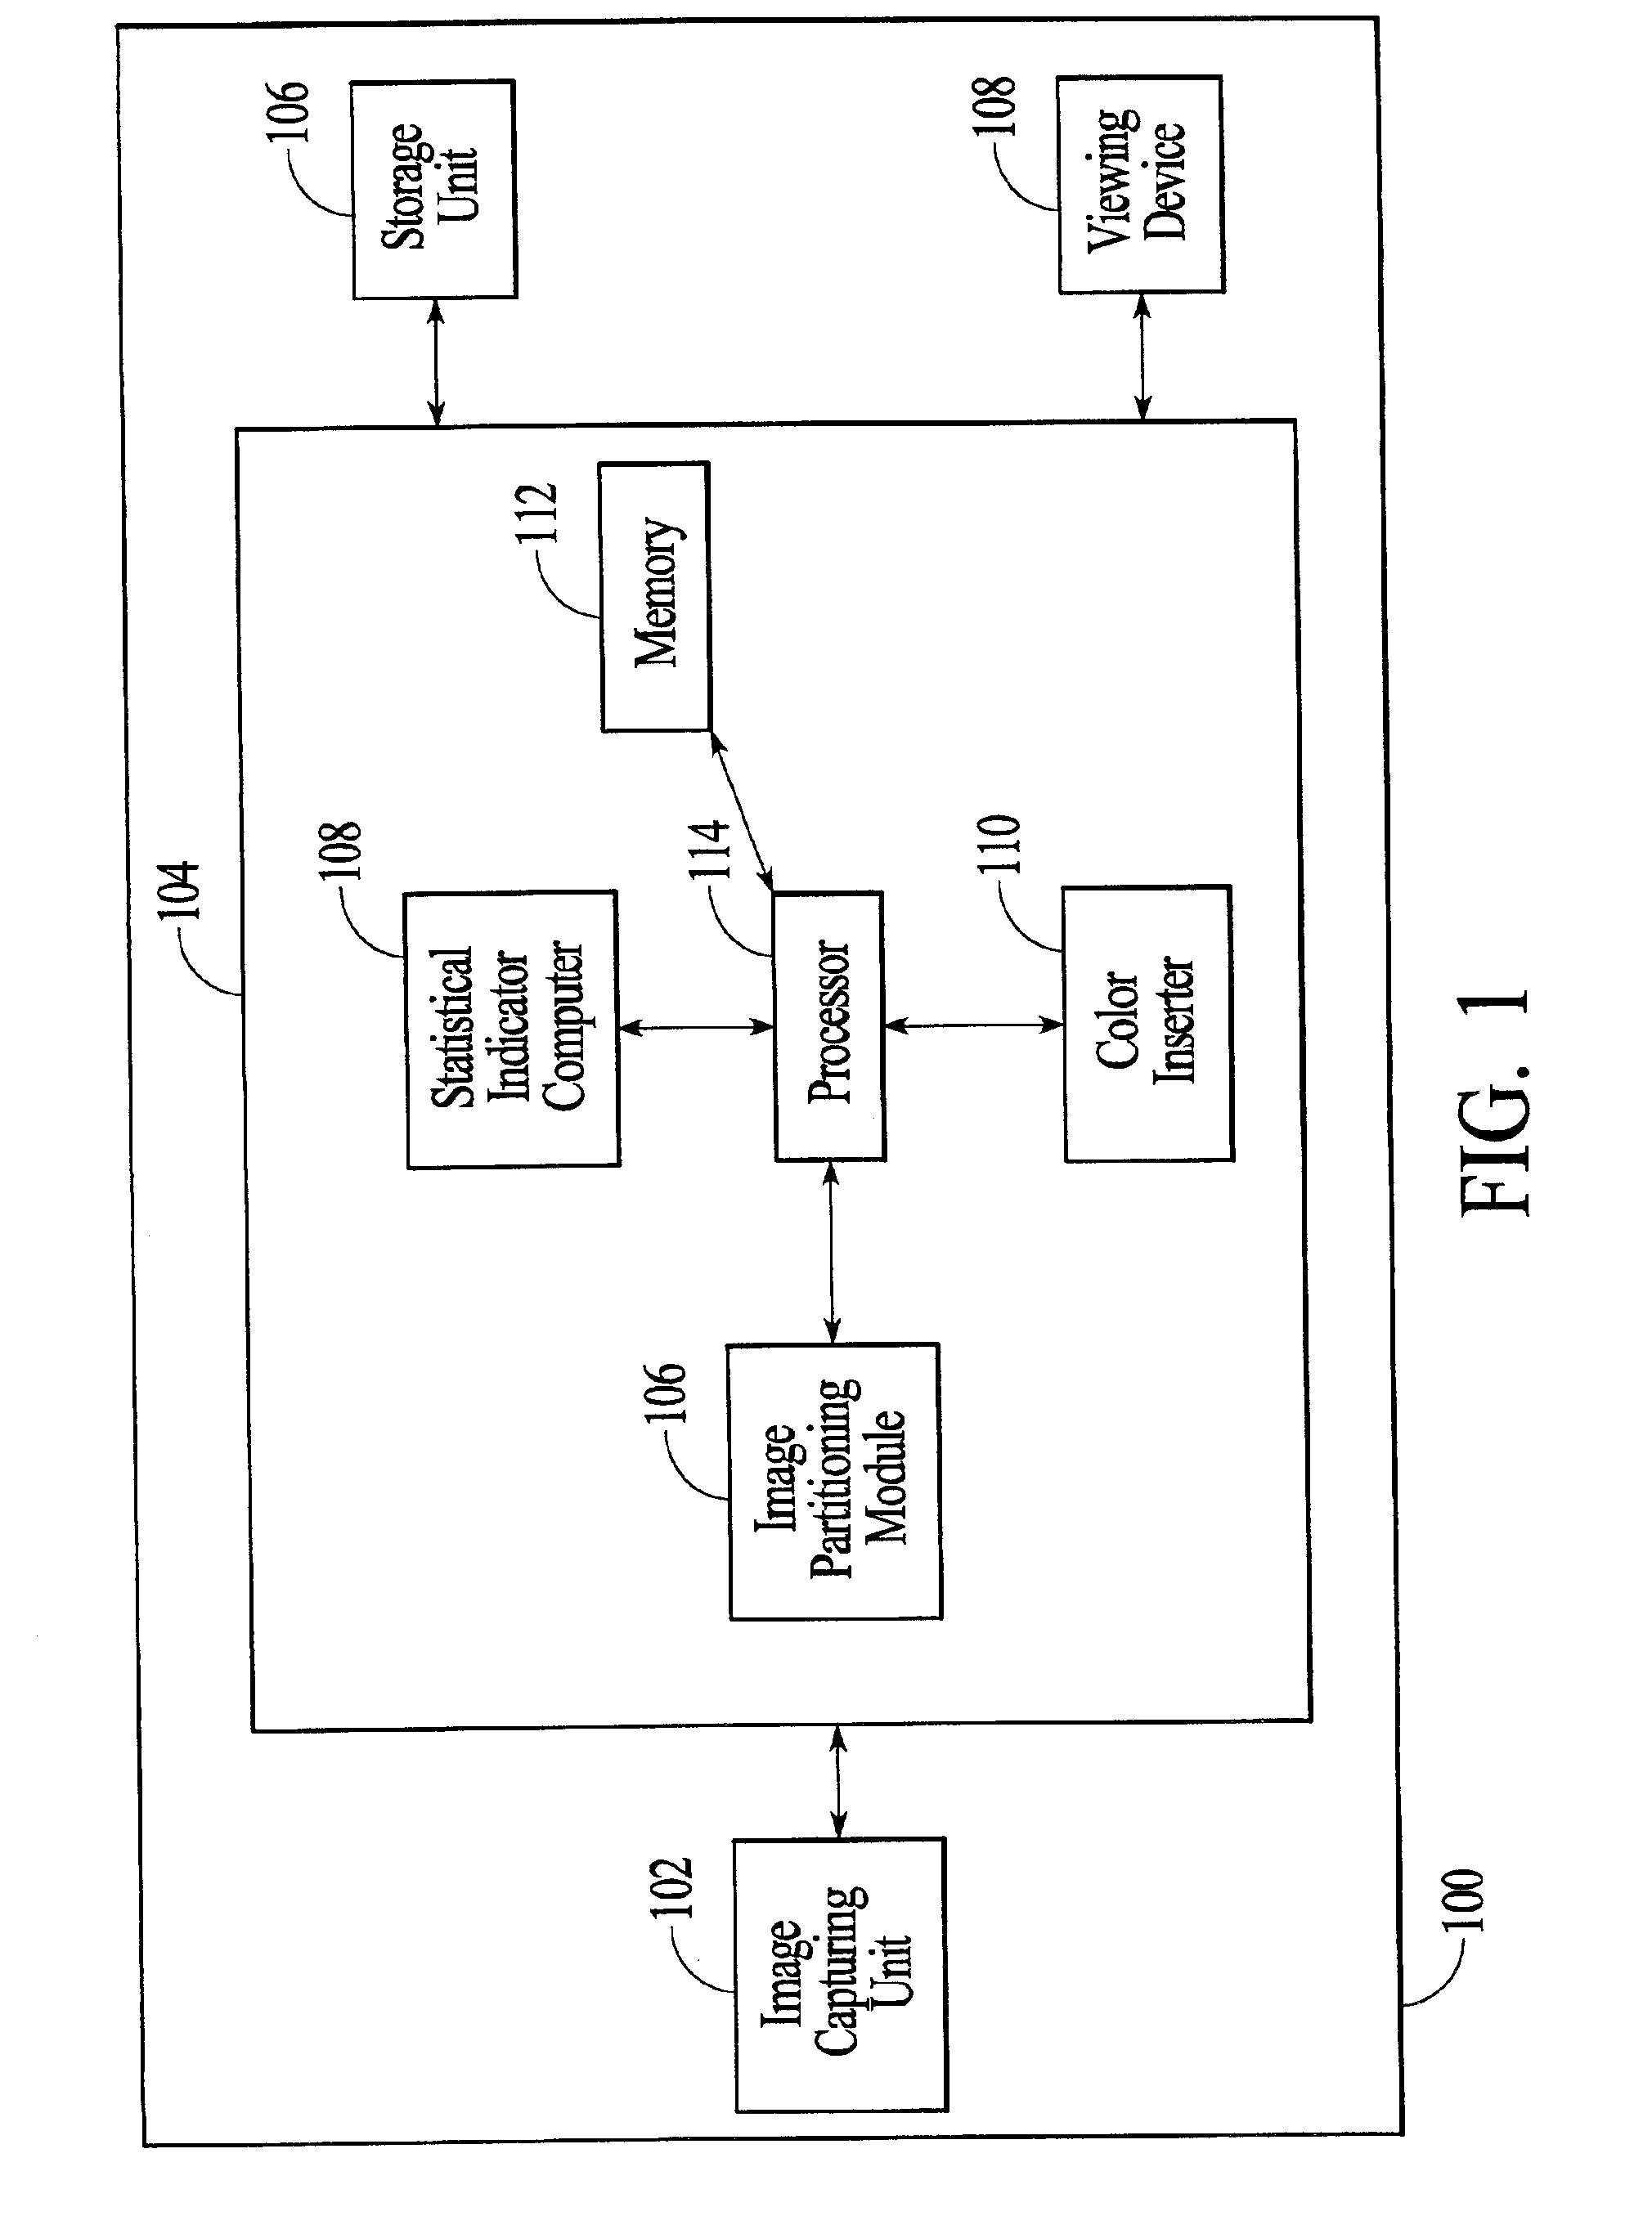 System and method for concurrently demosaicing and resizing raw data images